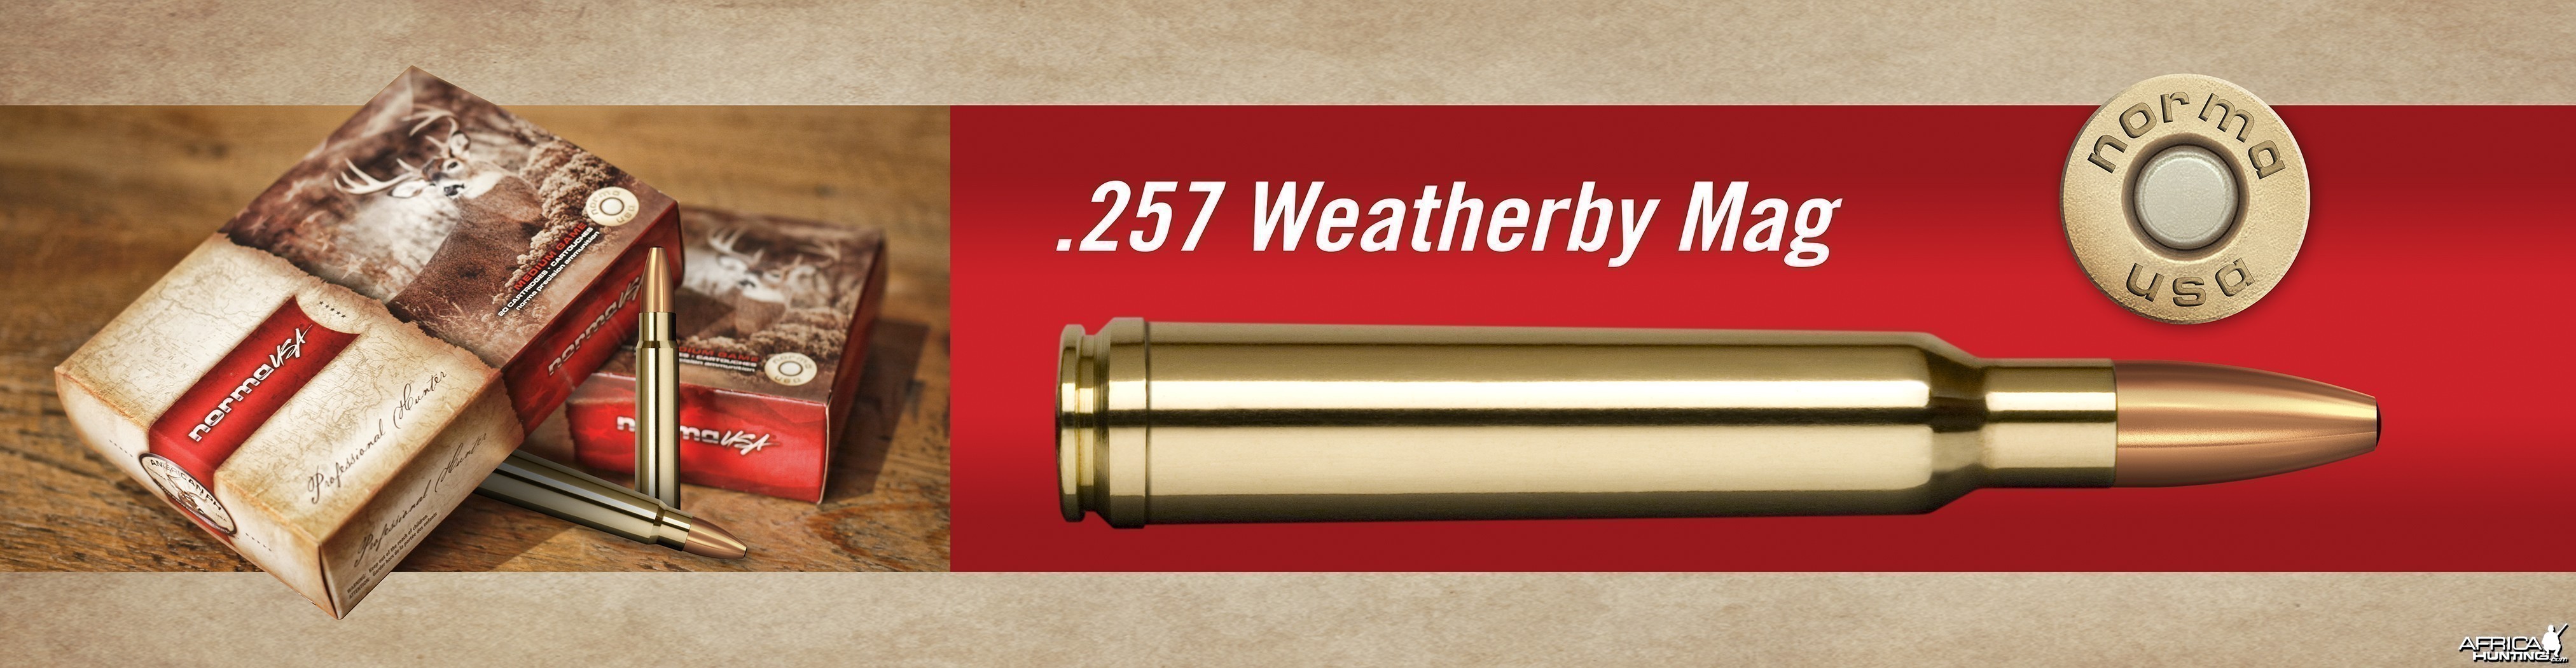 257 Weatherby Mag Africahunting Com